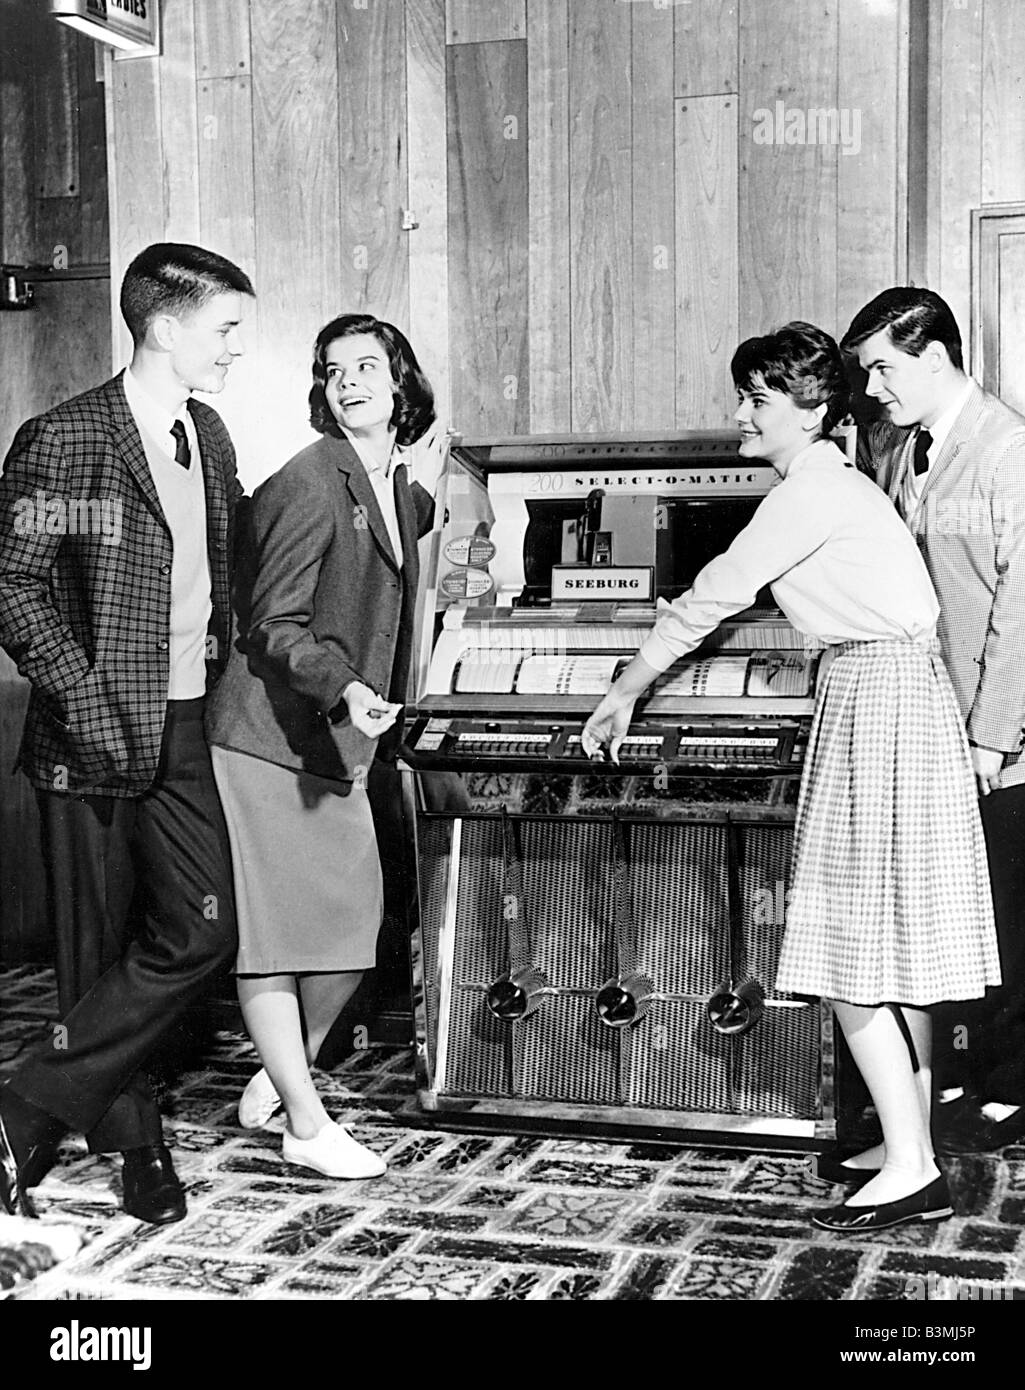 JUKEBOX  American teenagers with jukebox about 1956 Stock Photo